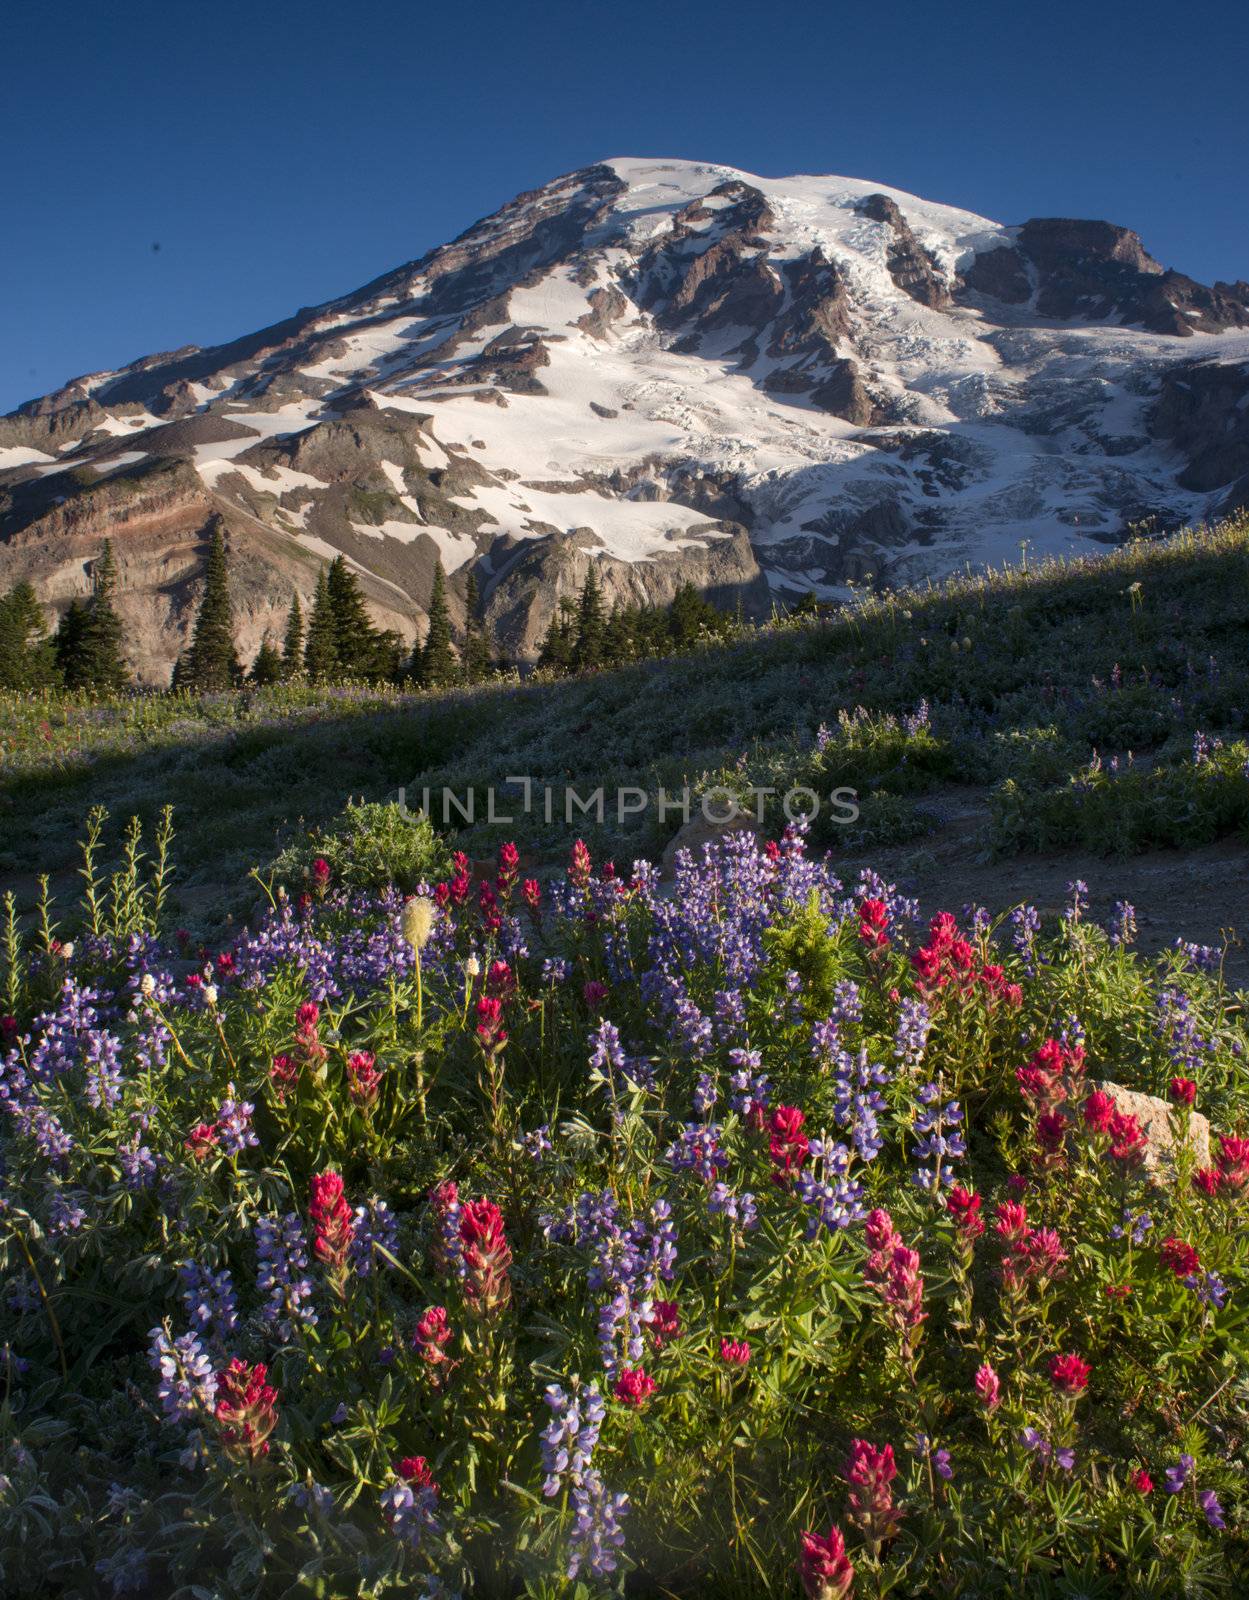 Mt. Rainier and Wildflowers in Bloom by ChrisBoswell